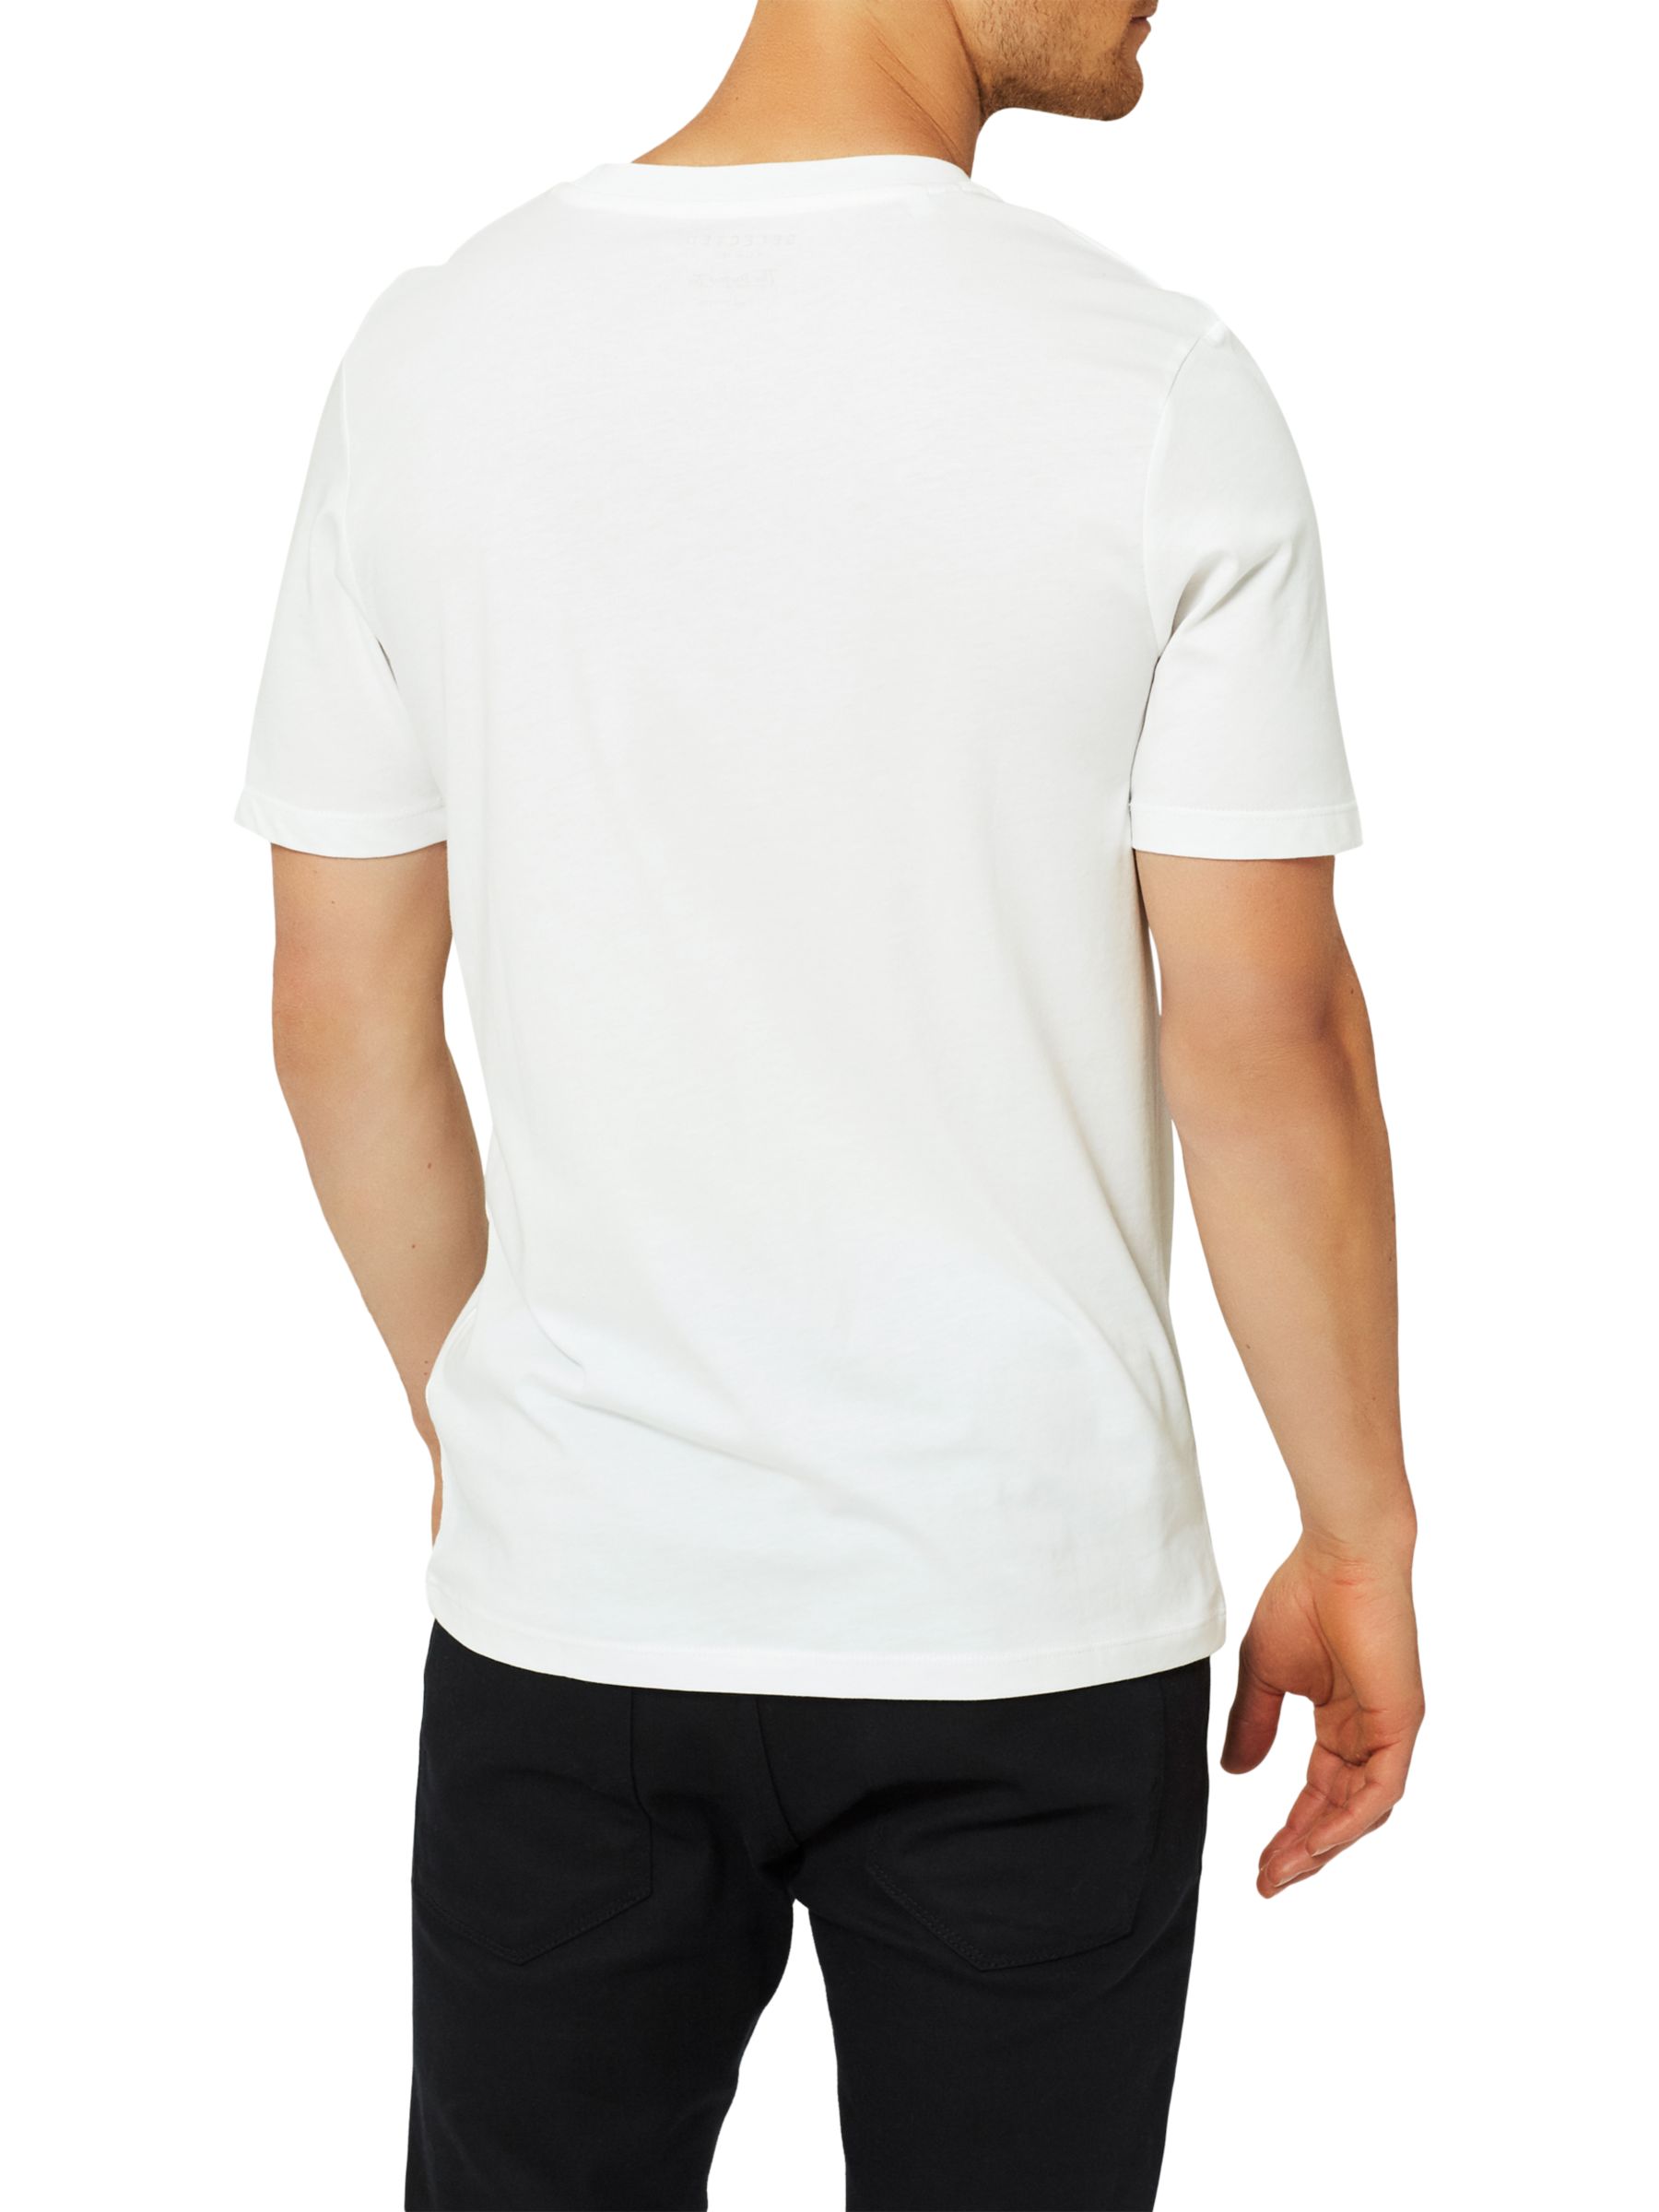 SELECTED HOMME 'The Perfect Tee' Pima Cotton T-Shirt